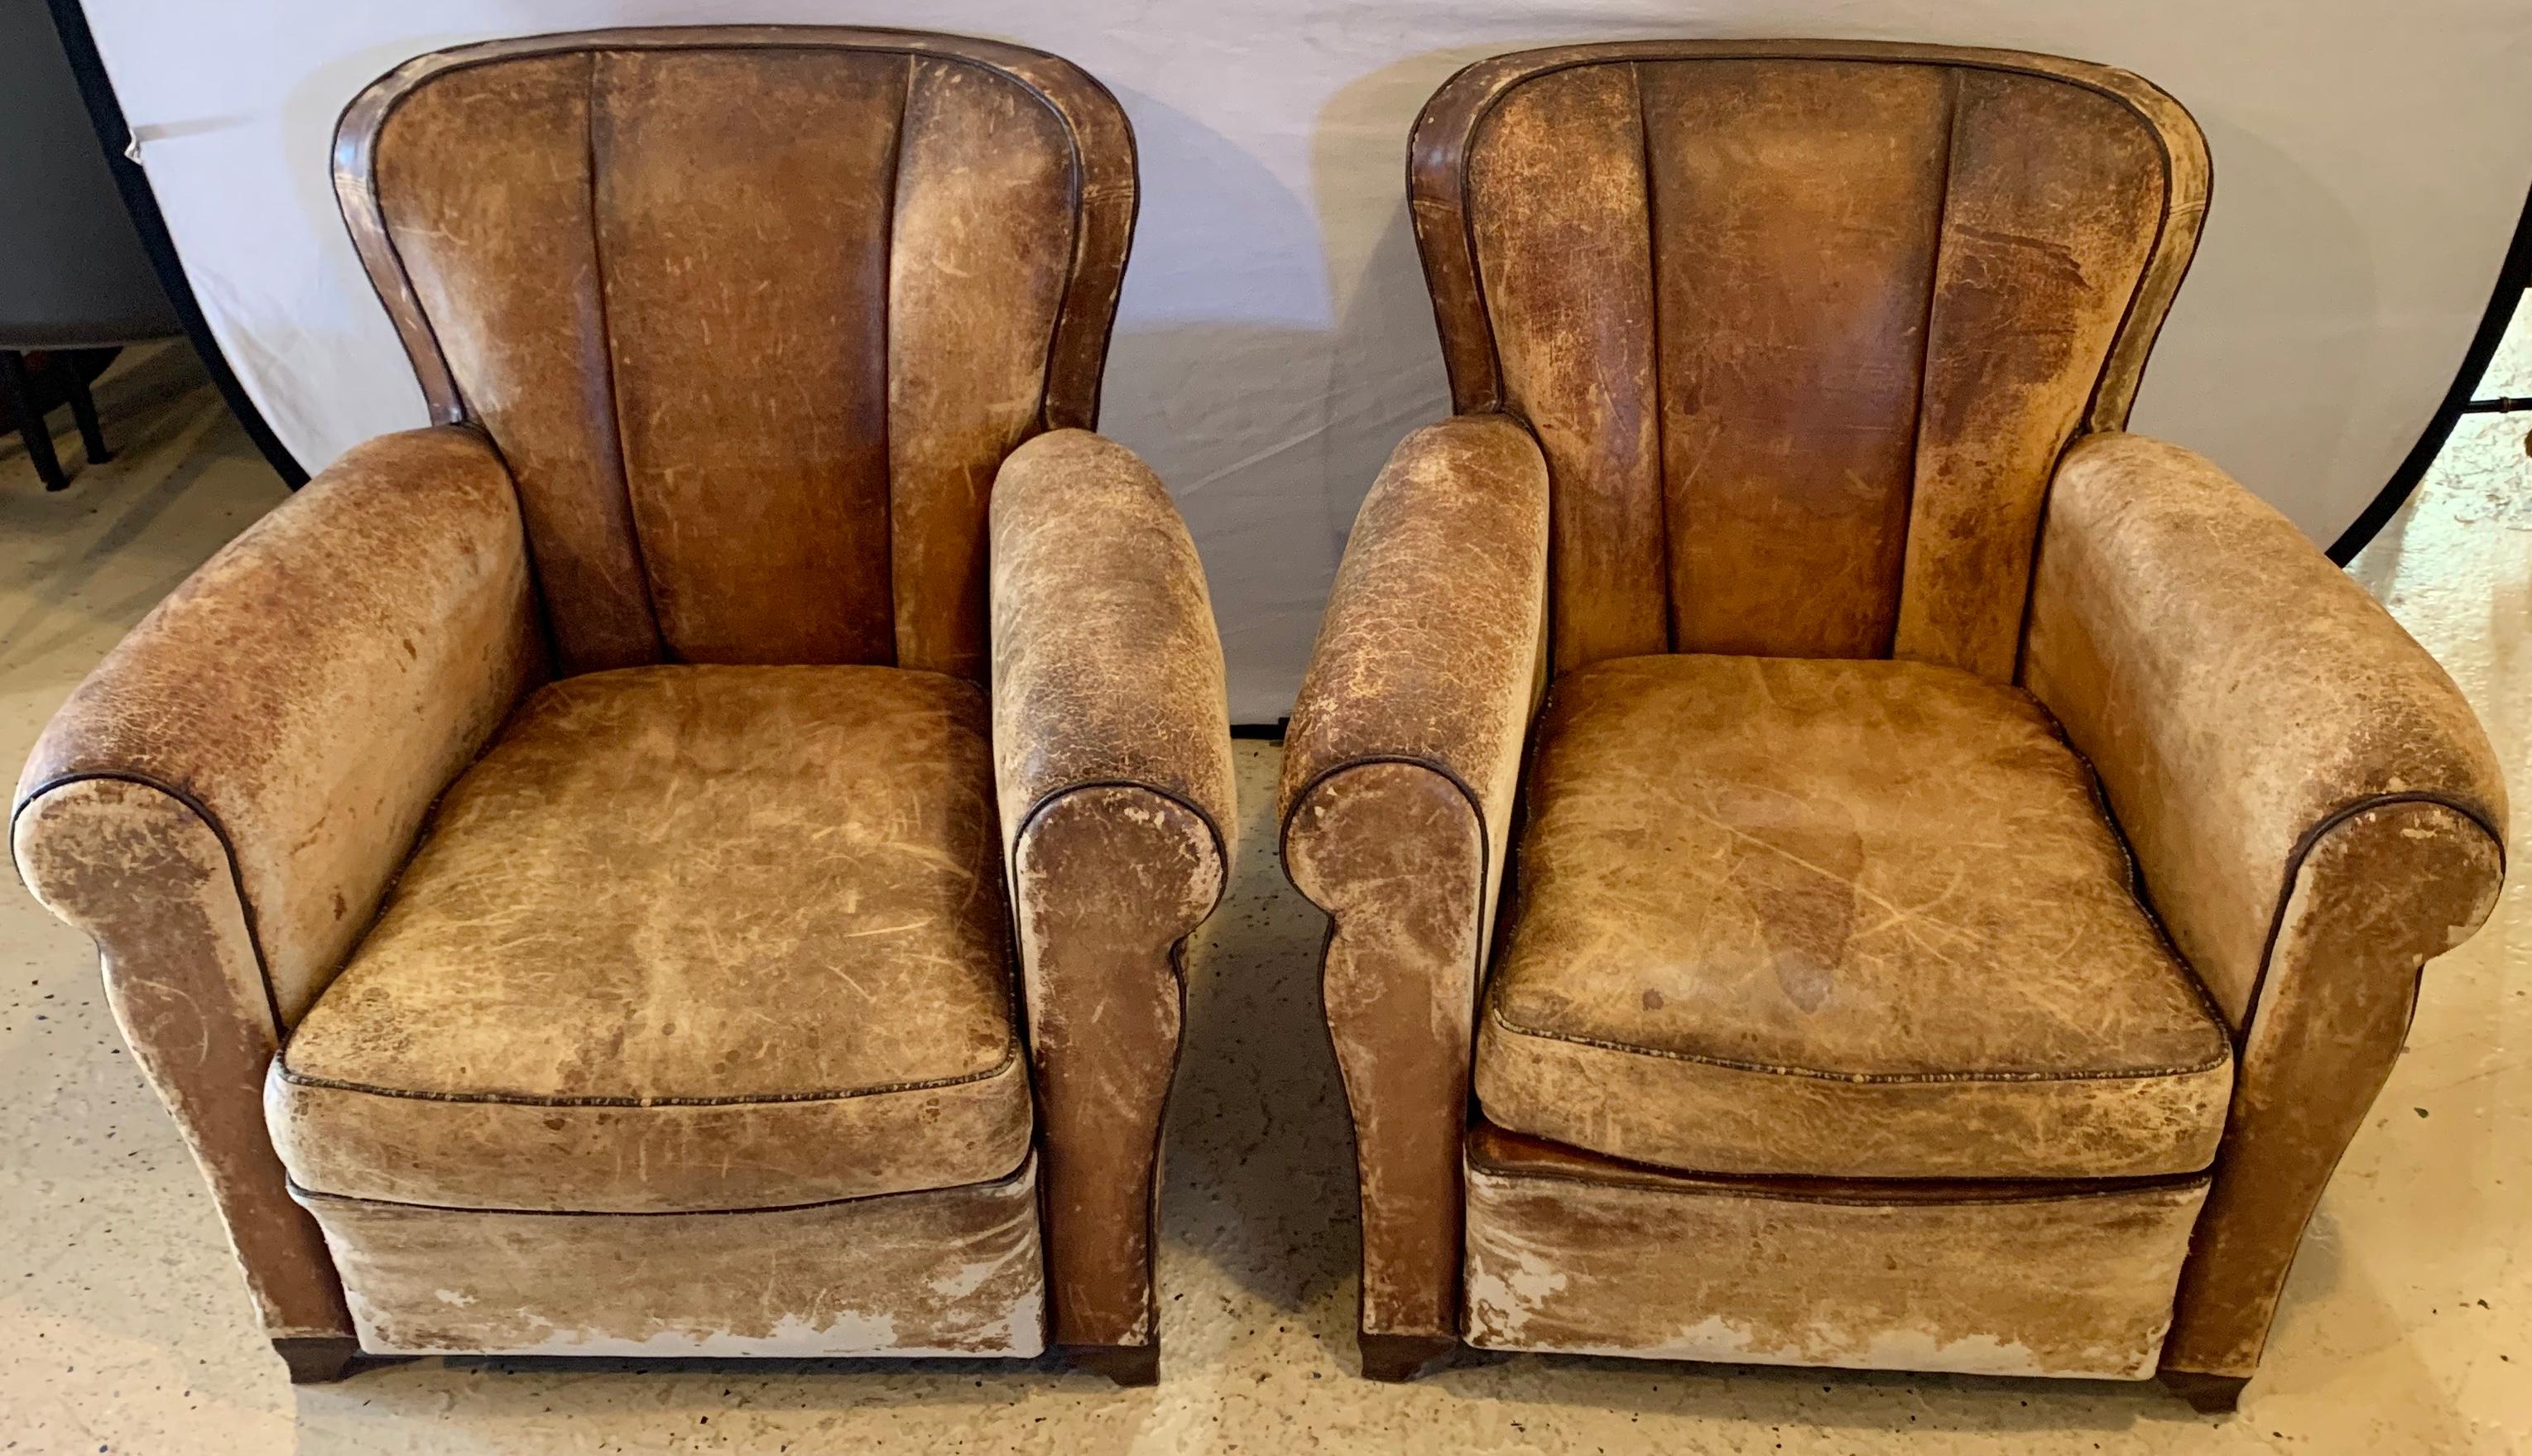 Pair of Art Deco leather lounge chairs, circa 1940s. These finely constructed and worn leather lounge or club chairs in the Art Deco manner have been recently re wired. These chair are very structurally sound.

Greg

hxx.